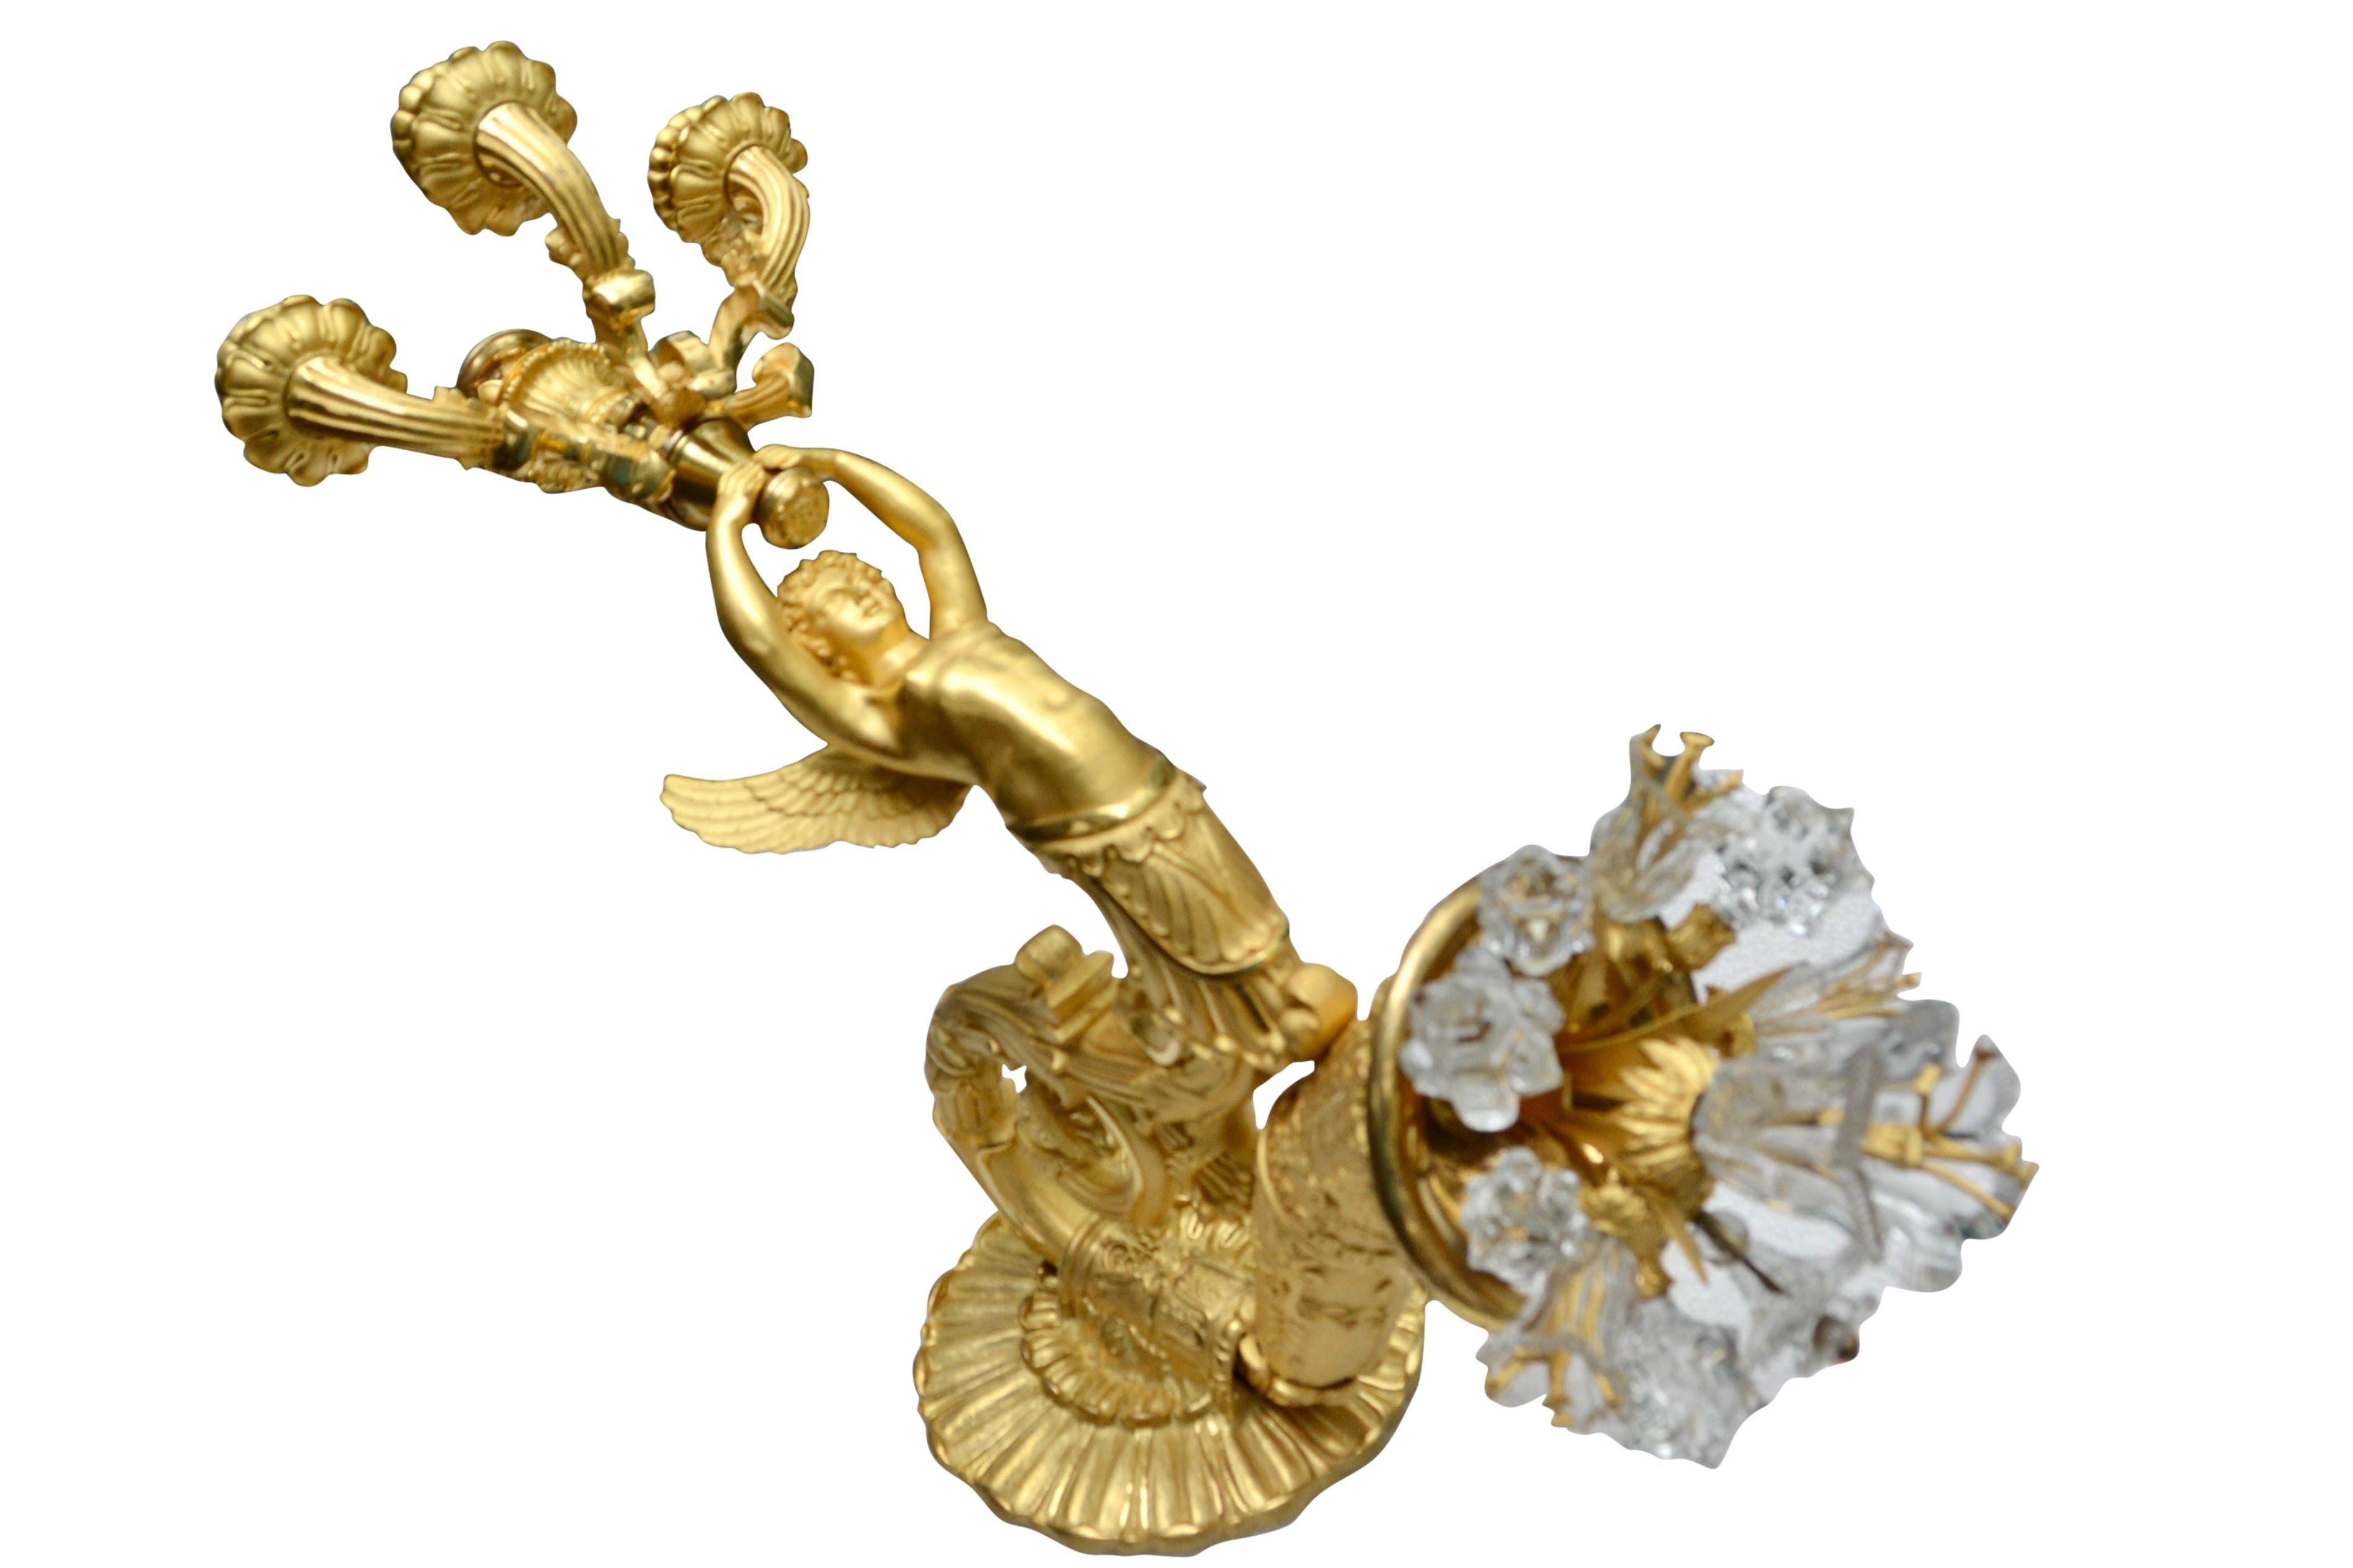 Large French Empire Gilt Bronze and Crystal Sconce Attributed to Thomire For Sale 2